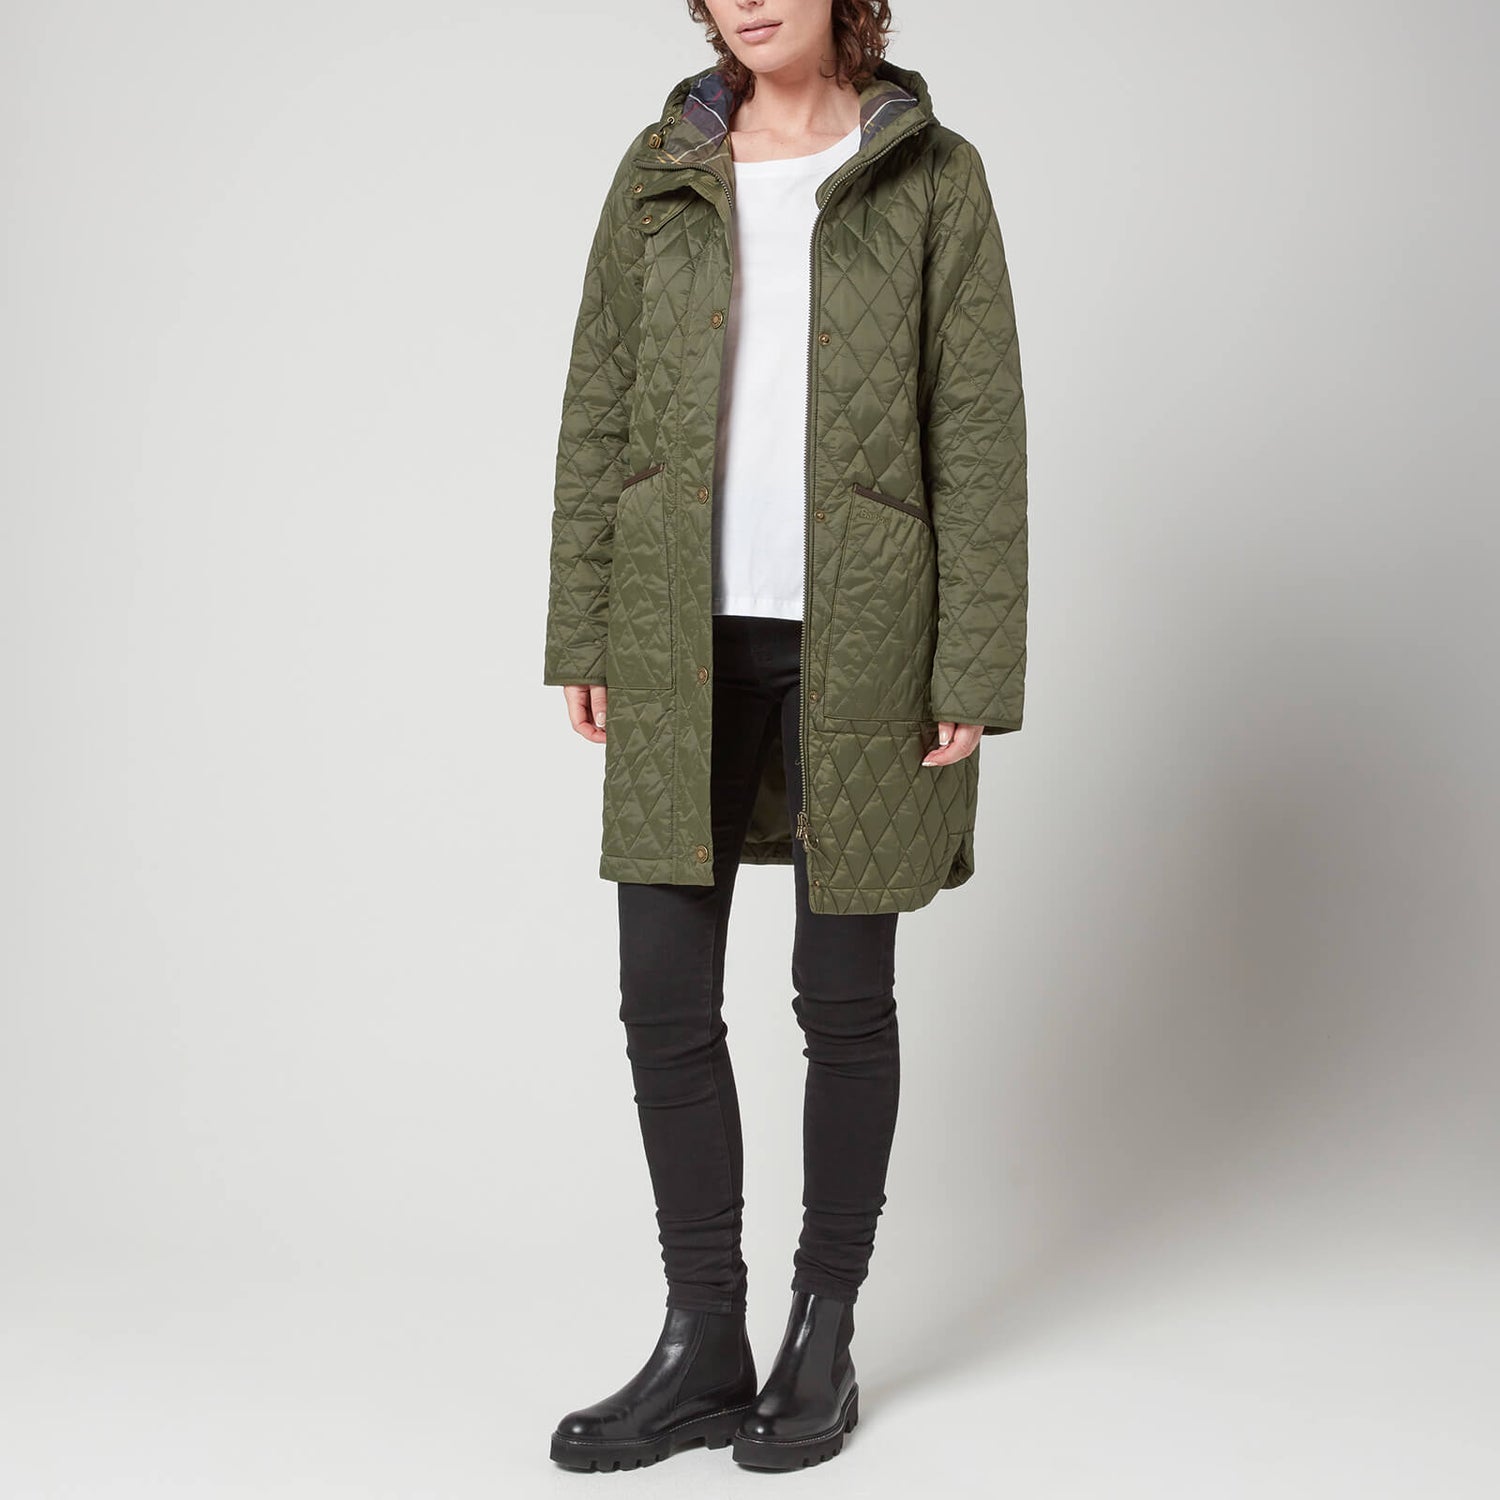 Barbour Women's Dornoch Quilted Jacket - Olive/Classic